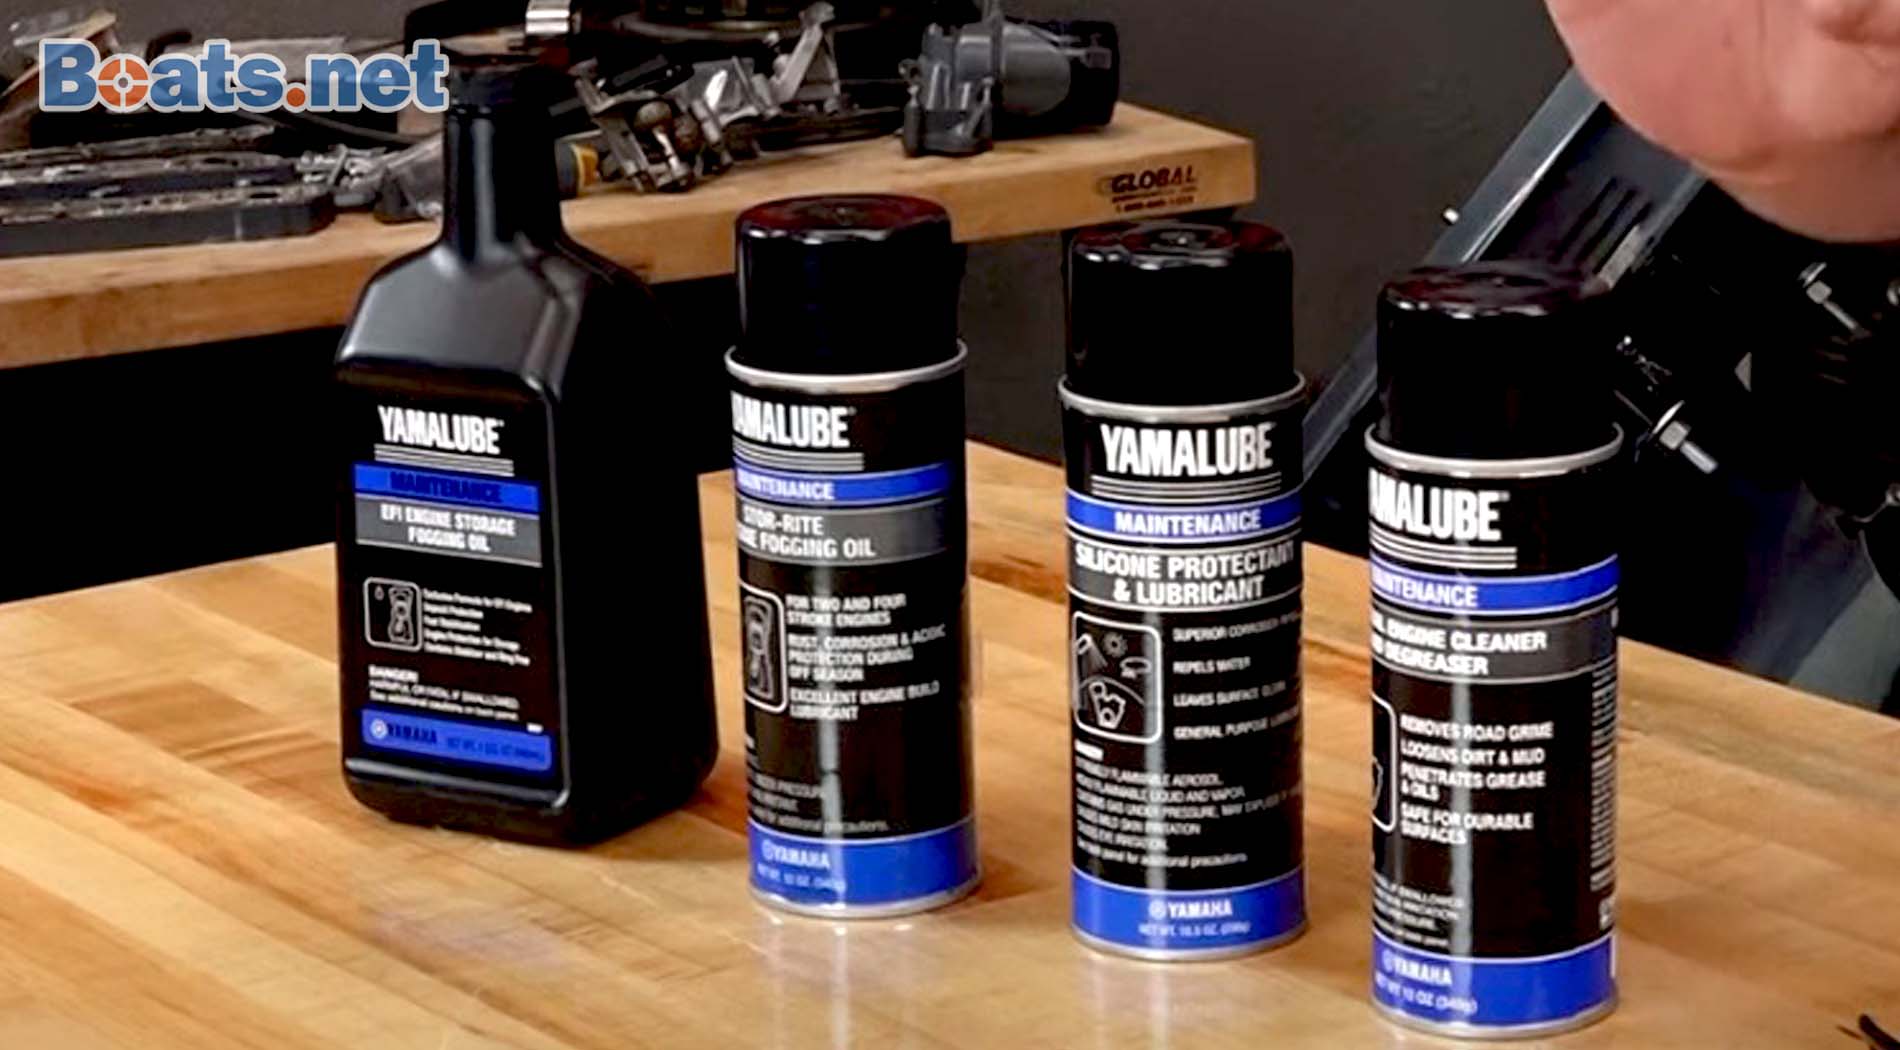 Yamaha outboard corrosion prevention products